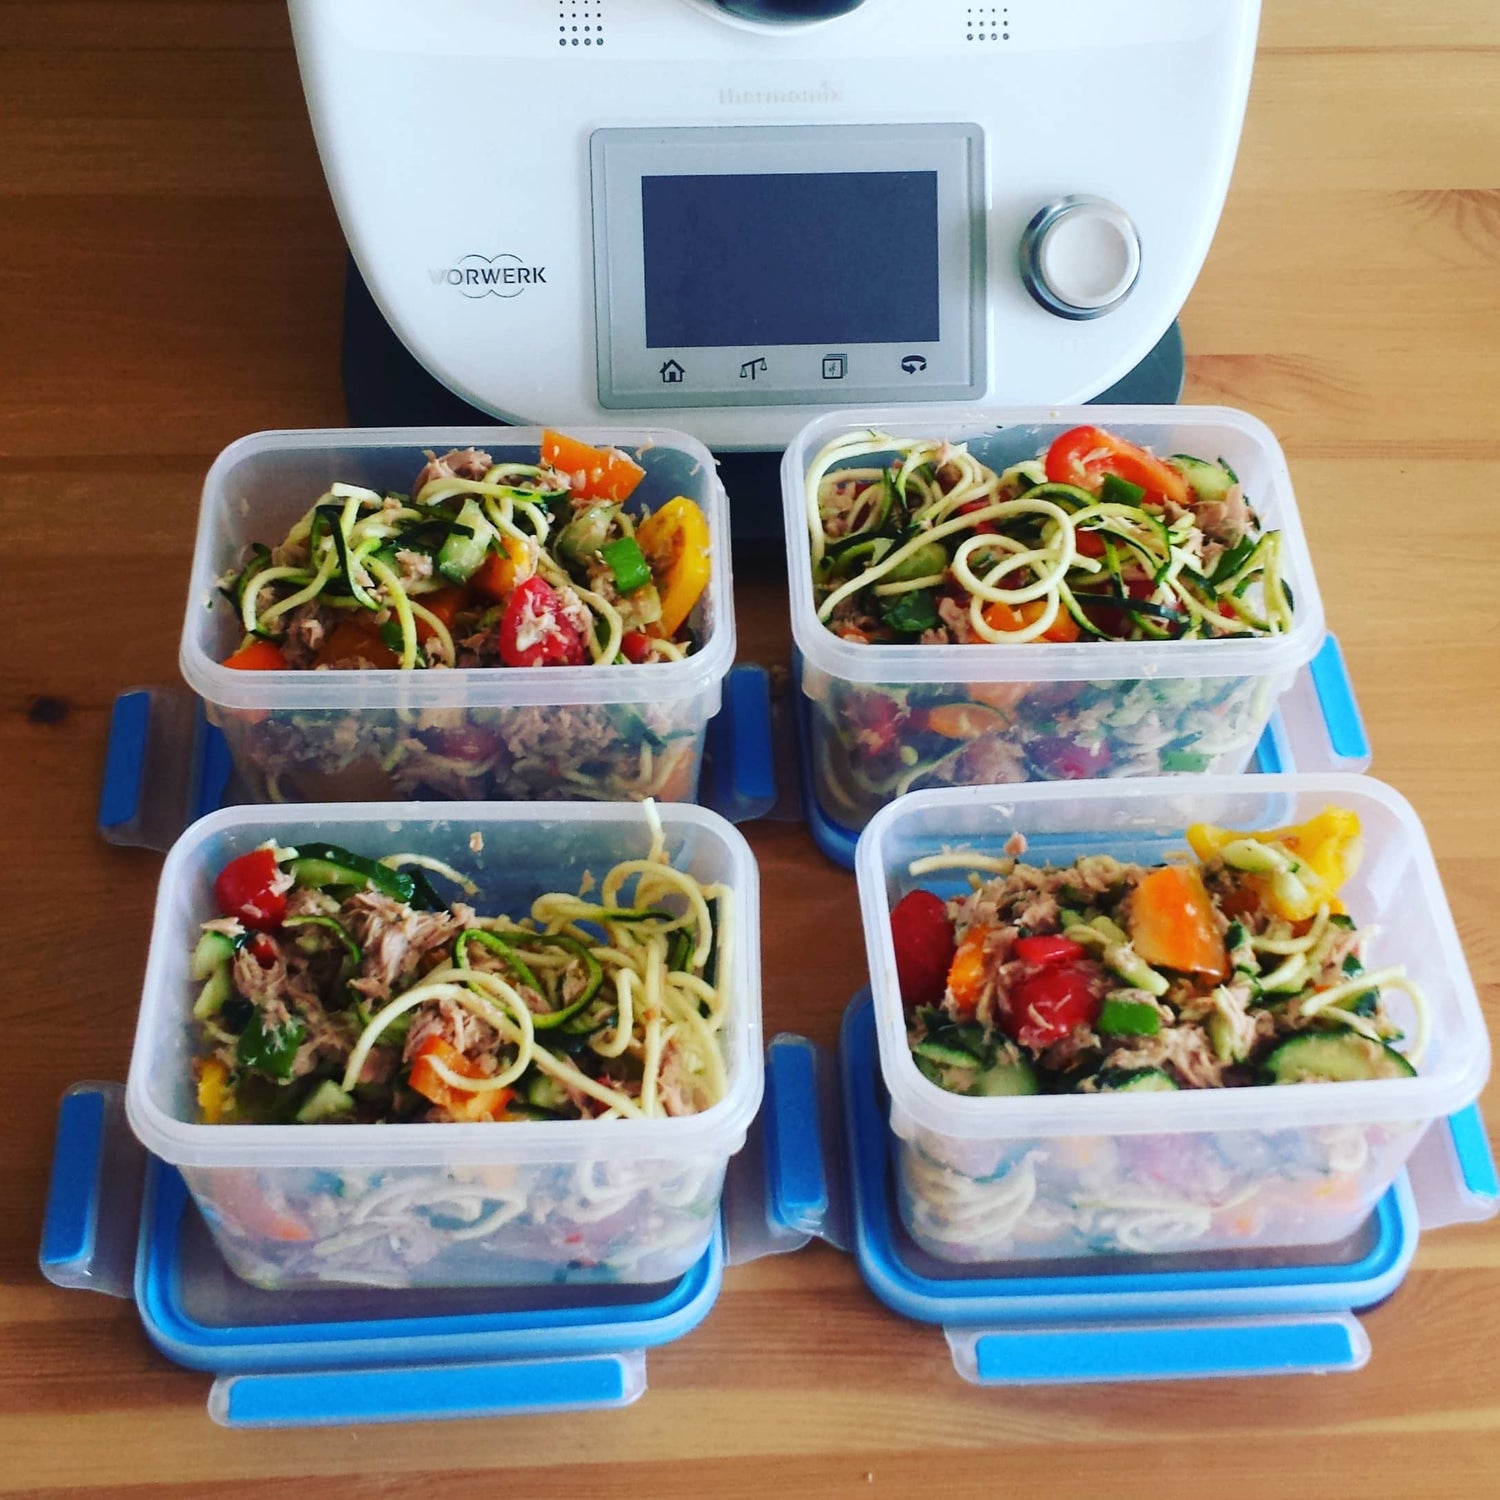 Meal-Prepping - Wundermix GmbH